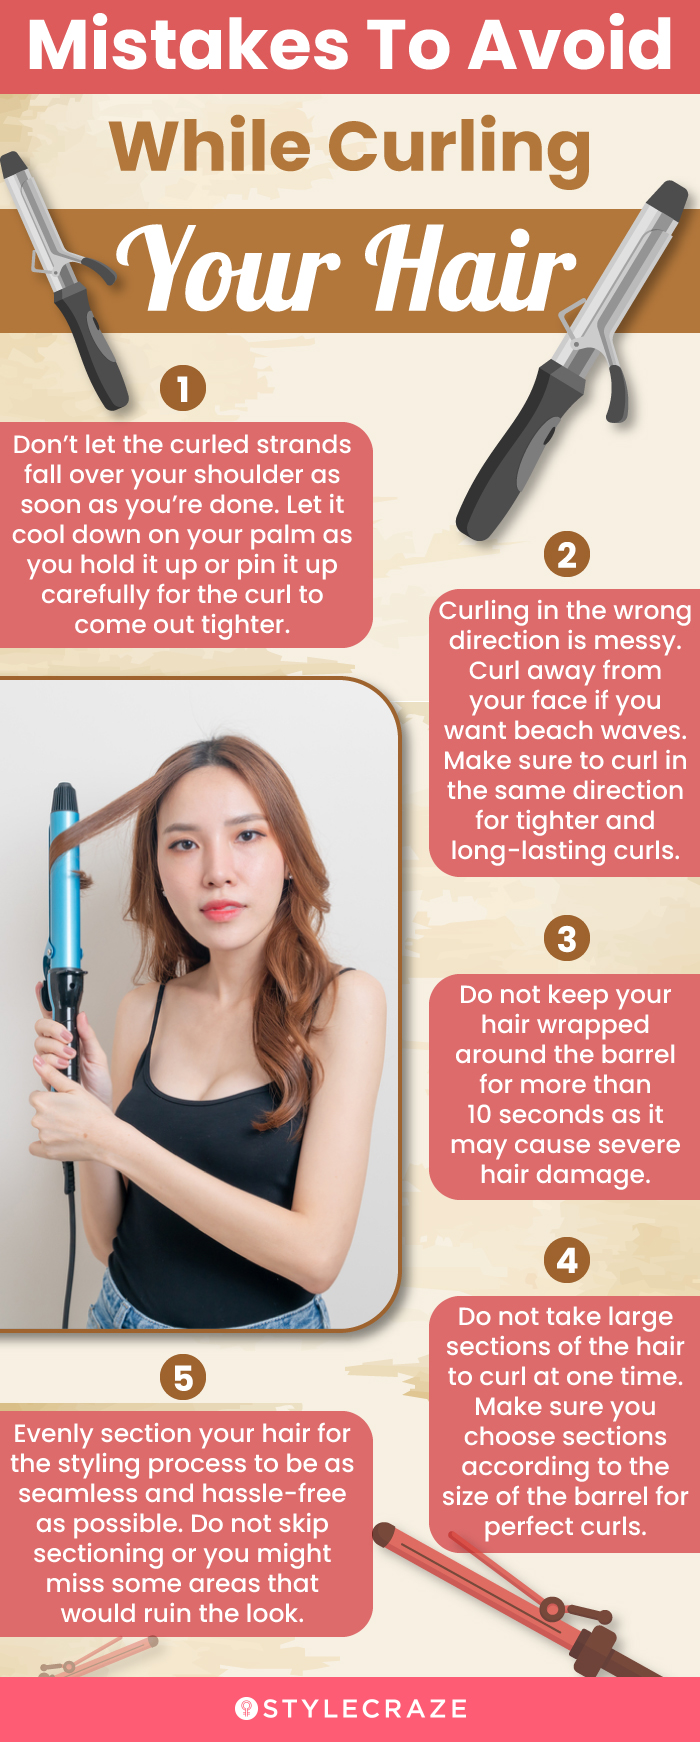 Mistakes To Avoid While Curling Your Hair (infographic)